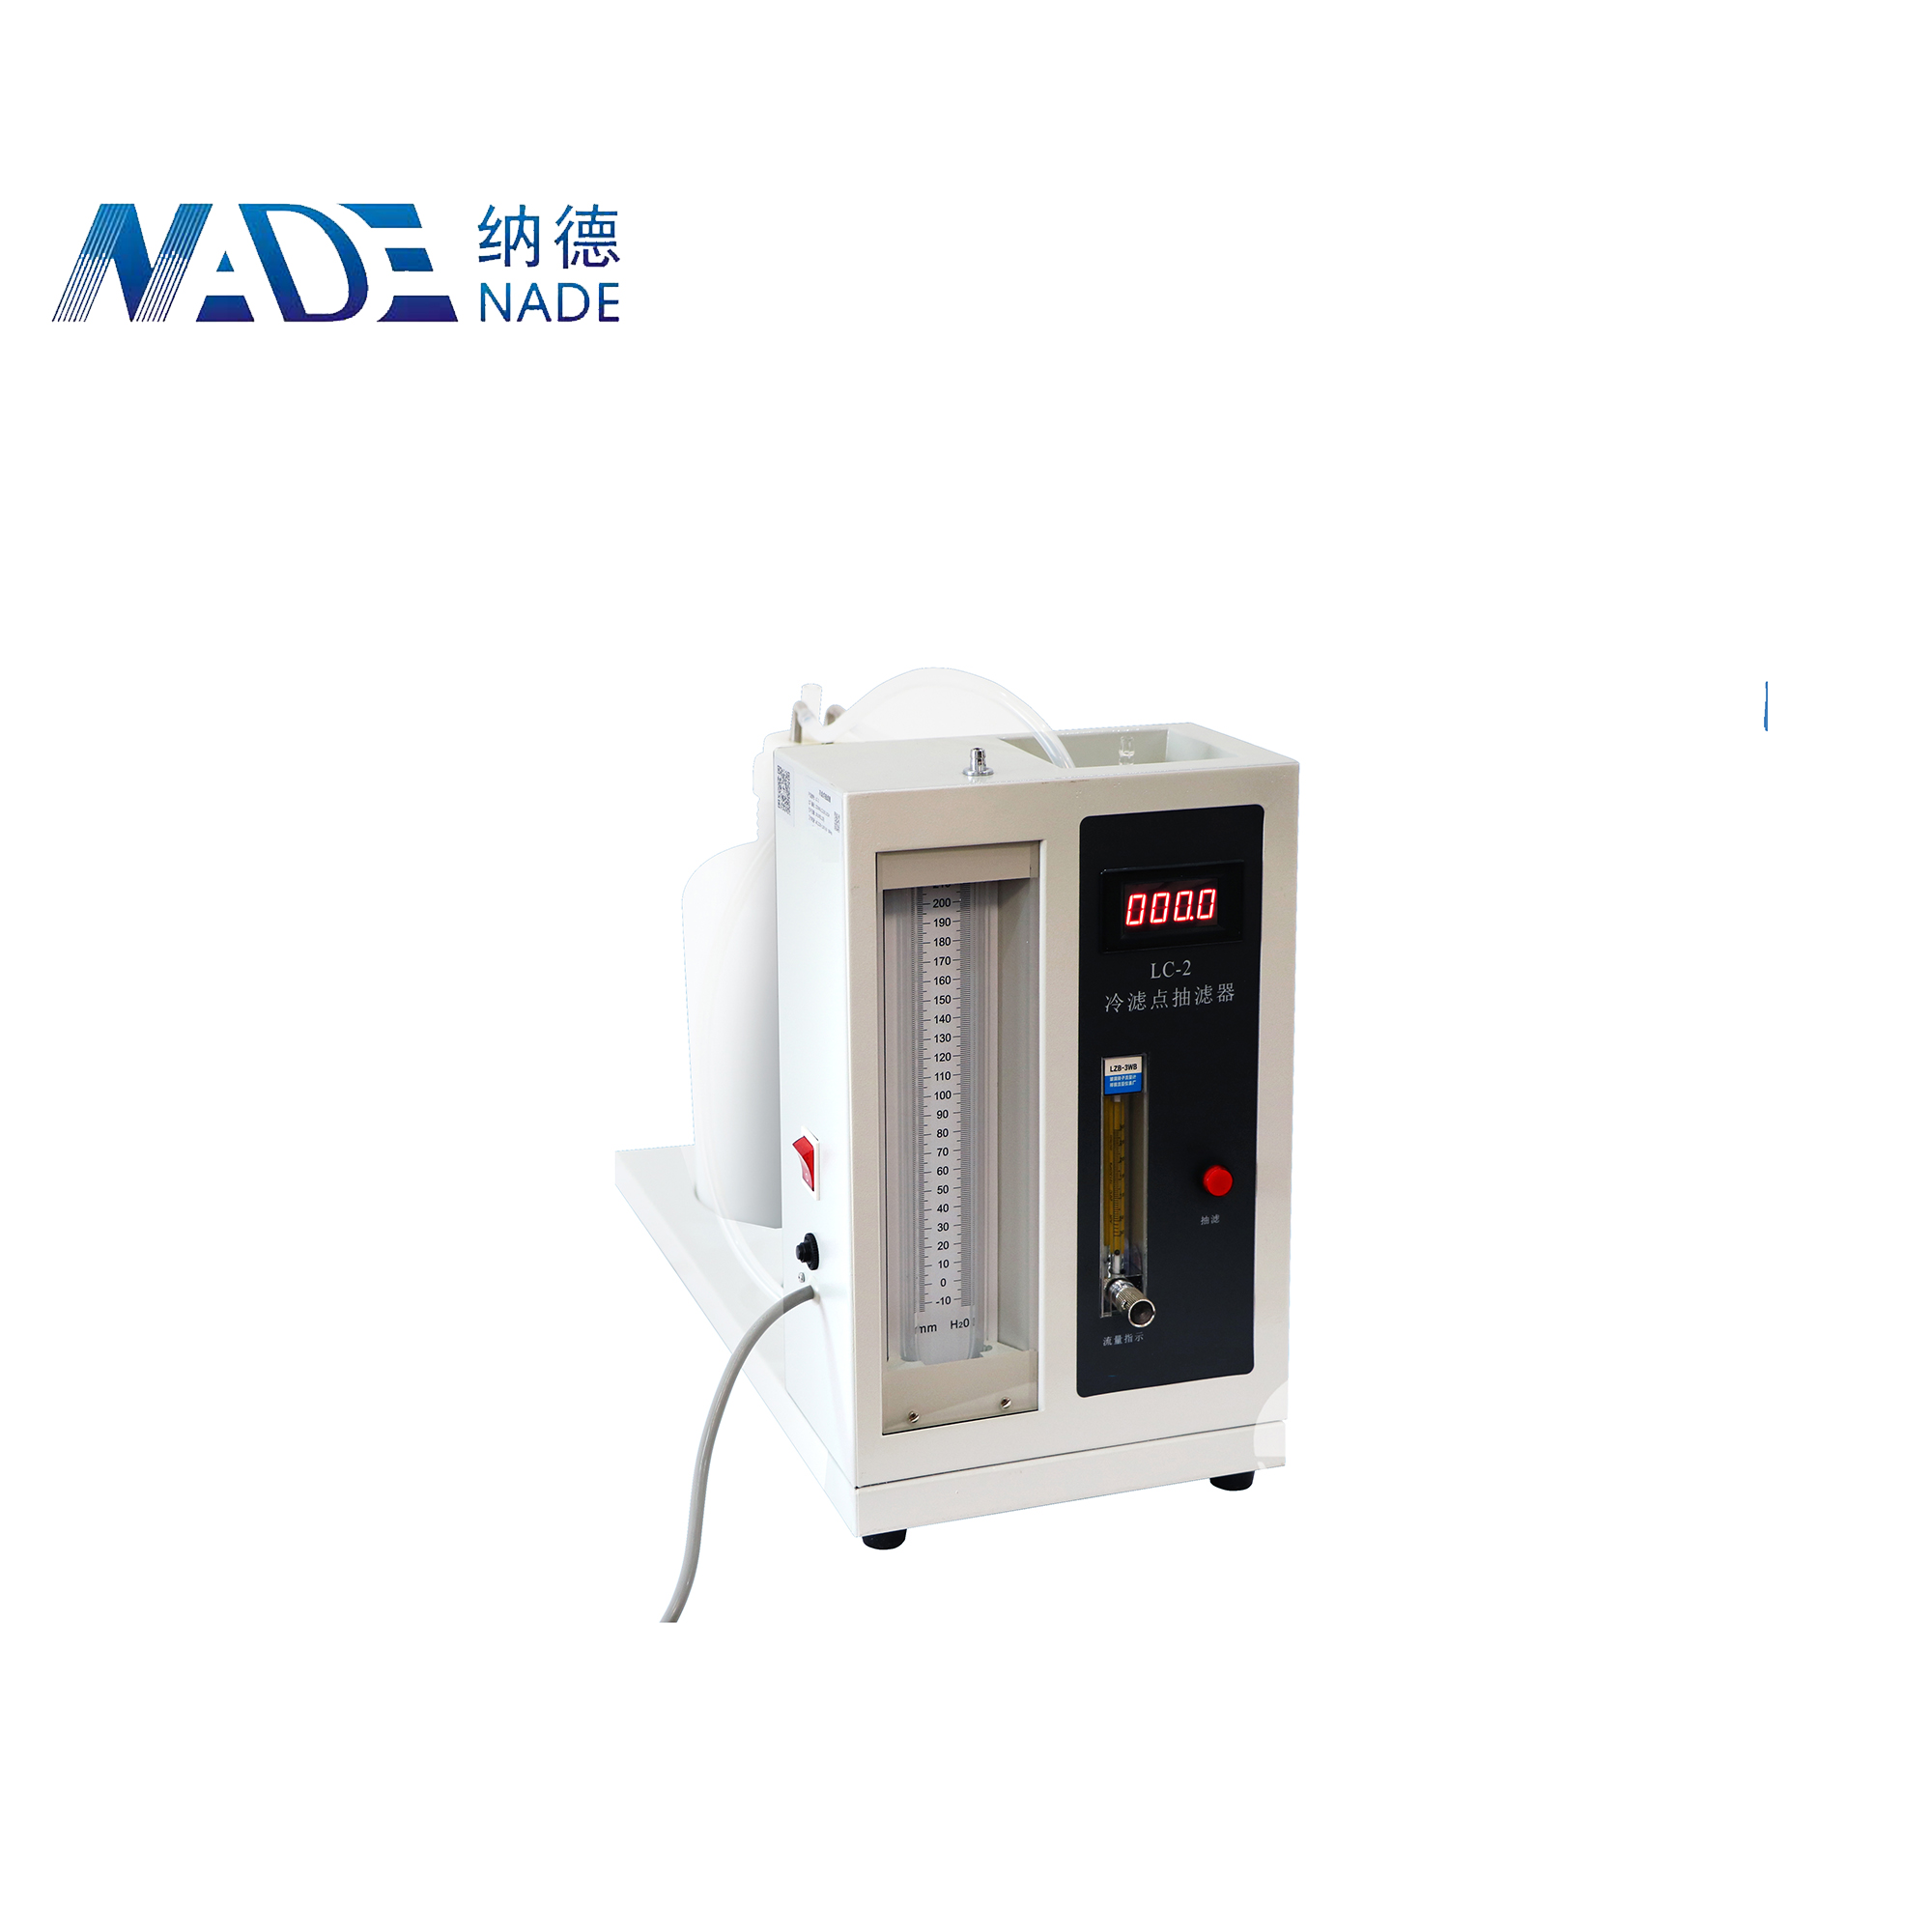 NADE LC-2 Laboratory Cold Filter Plugging Point Filter (2006 Standard) Accessories for Solidifying Flash Point Tester